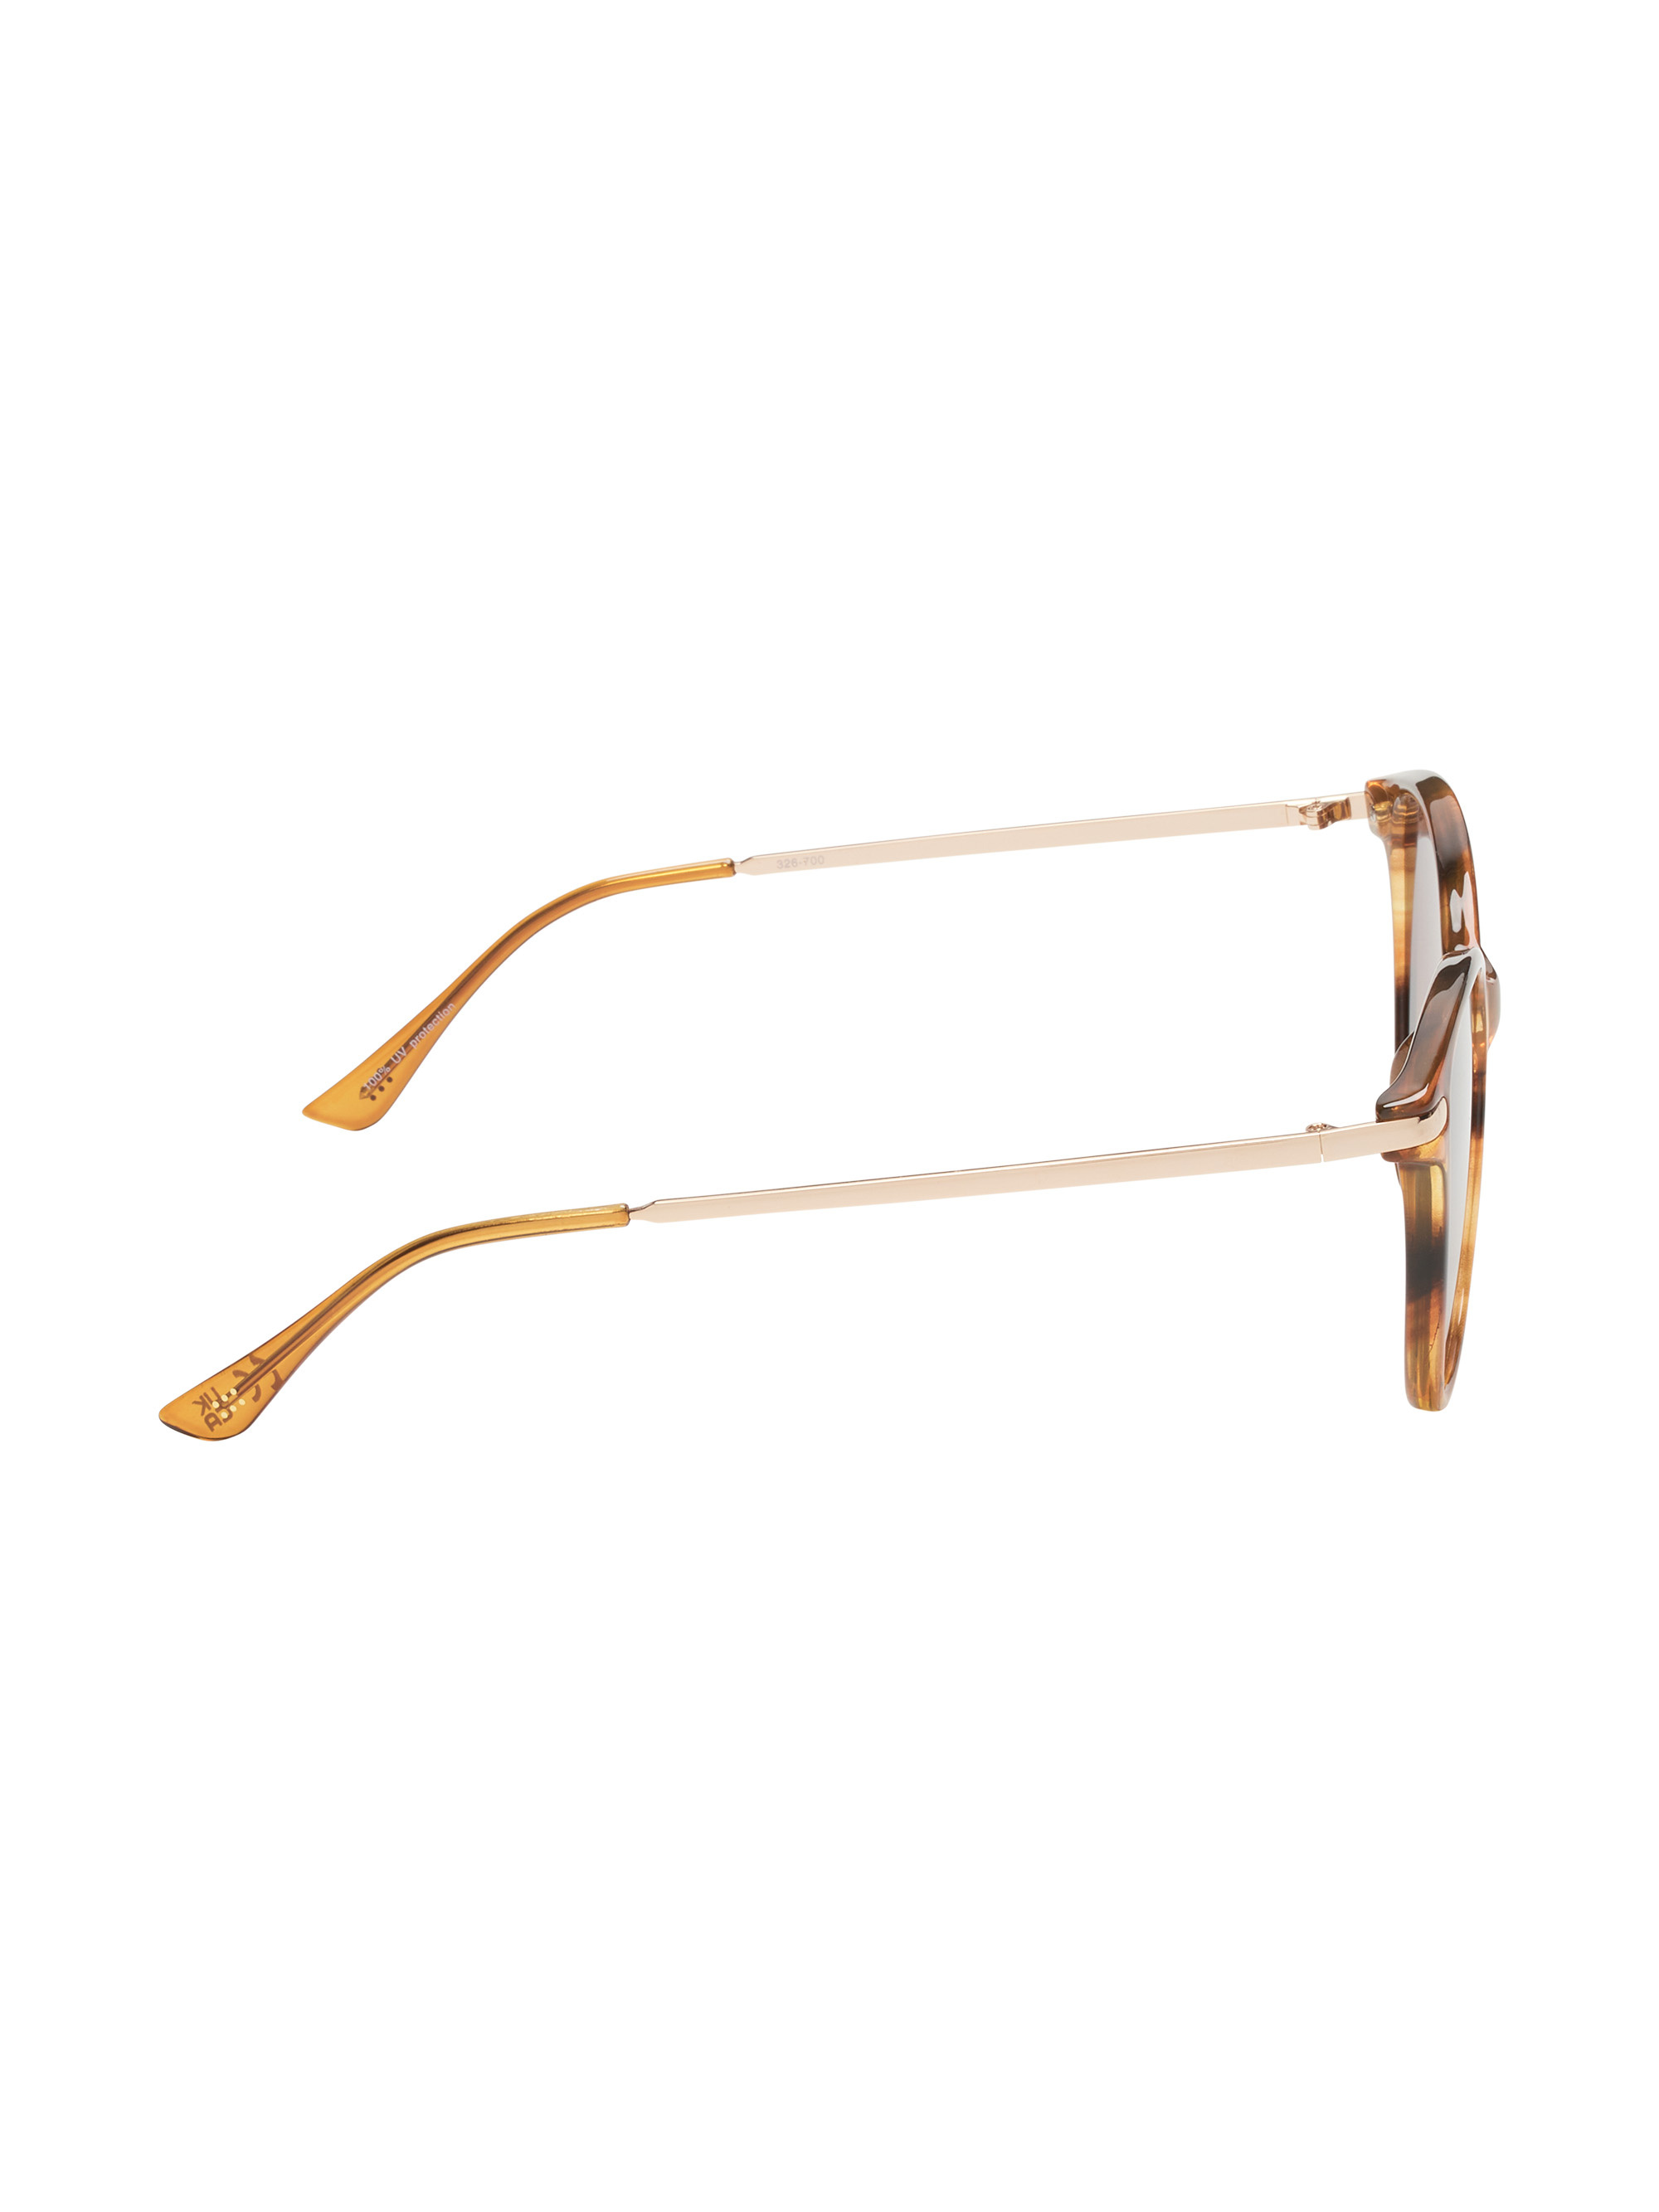 Six Sonnenbrille Recycled Sunglasses Collection in Braun, Braunmeliert 